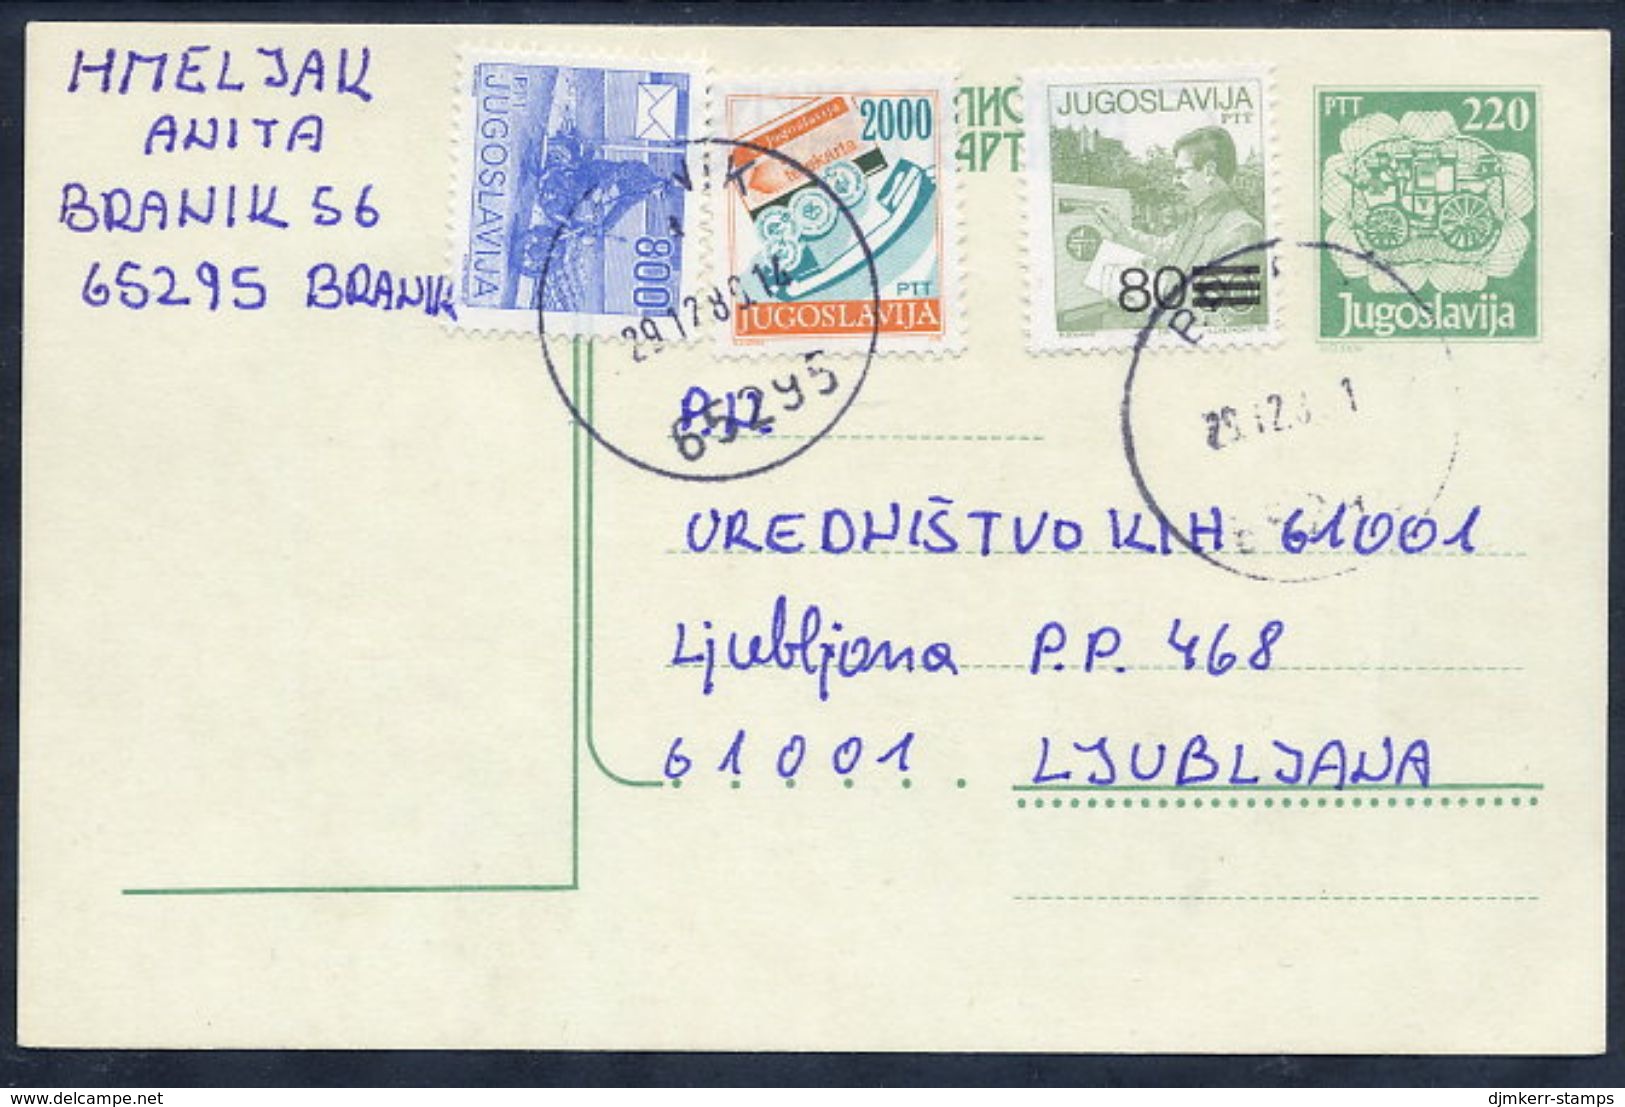 YUGOSLAVIA 1989 Mailcoach 220 D. Stationery Card Used With Additional Franking.  Michel P199 - Ganzsachen